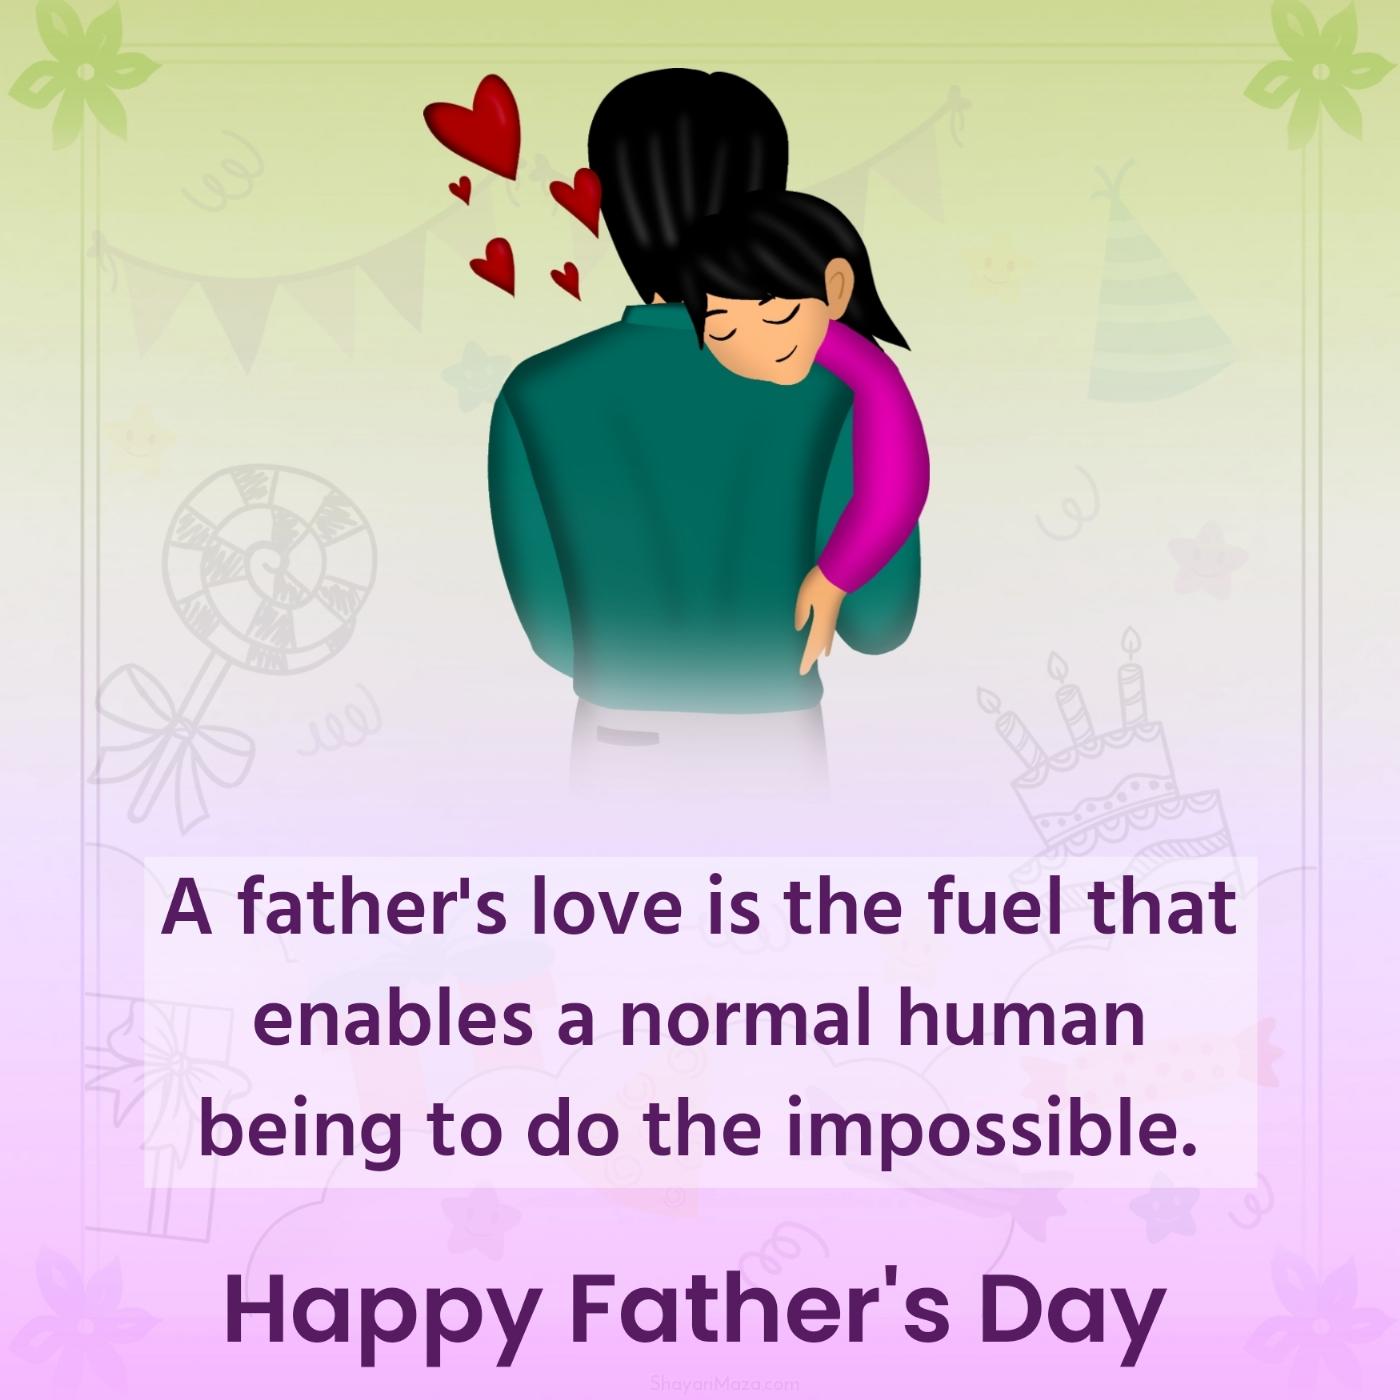 A father's love is the fuel that enables a normal human being